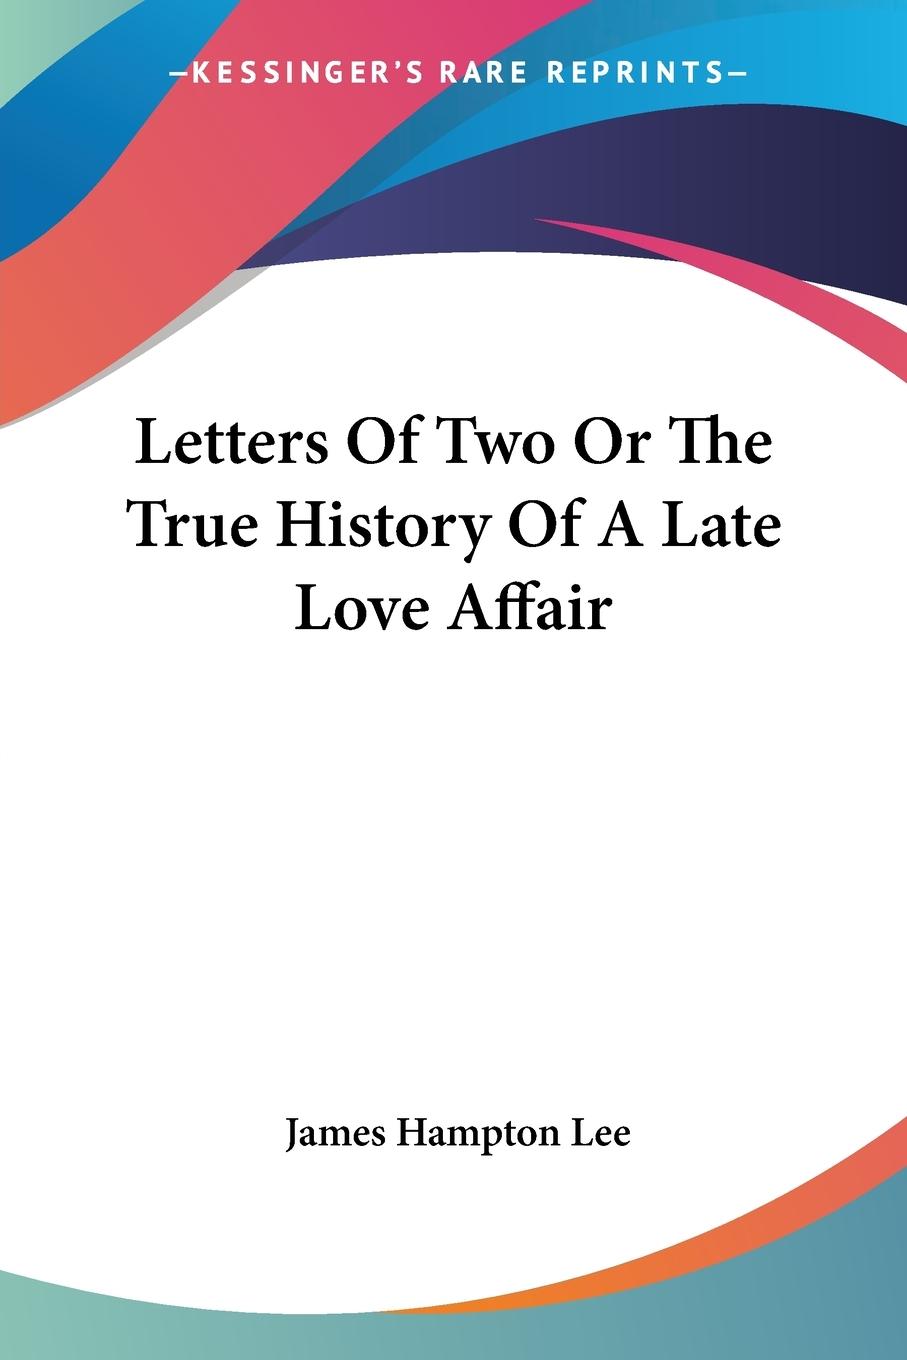 Letters Of Two Or The True History Of A Late Love Affair